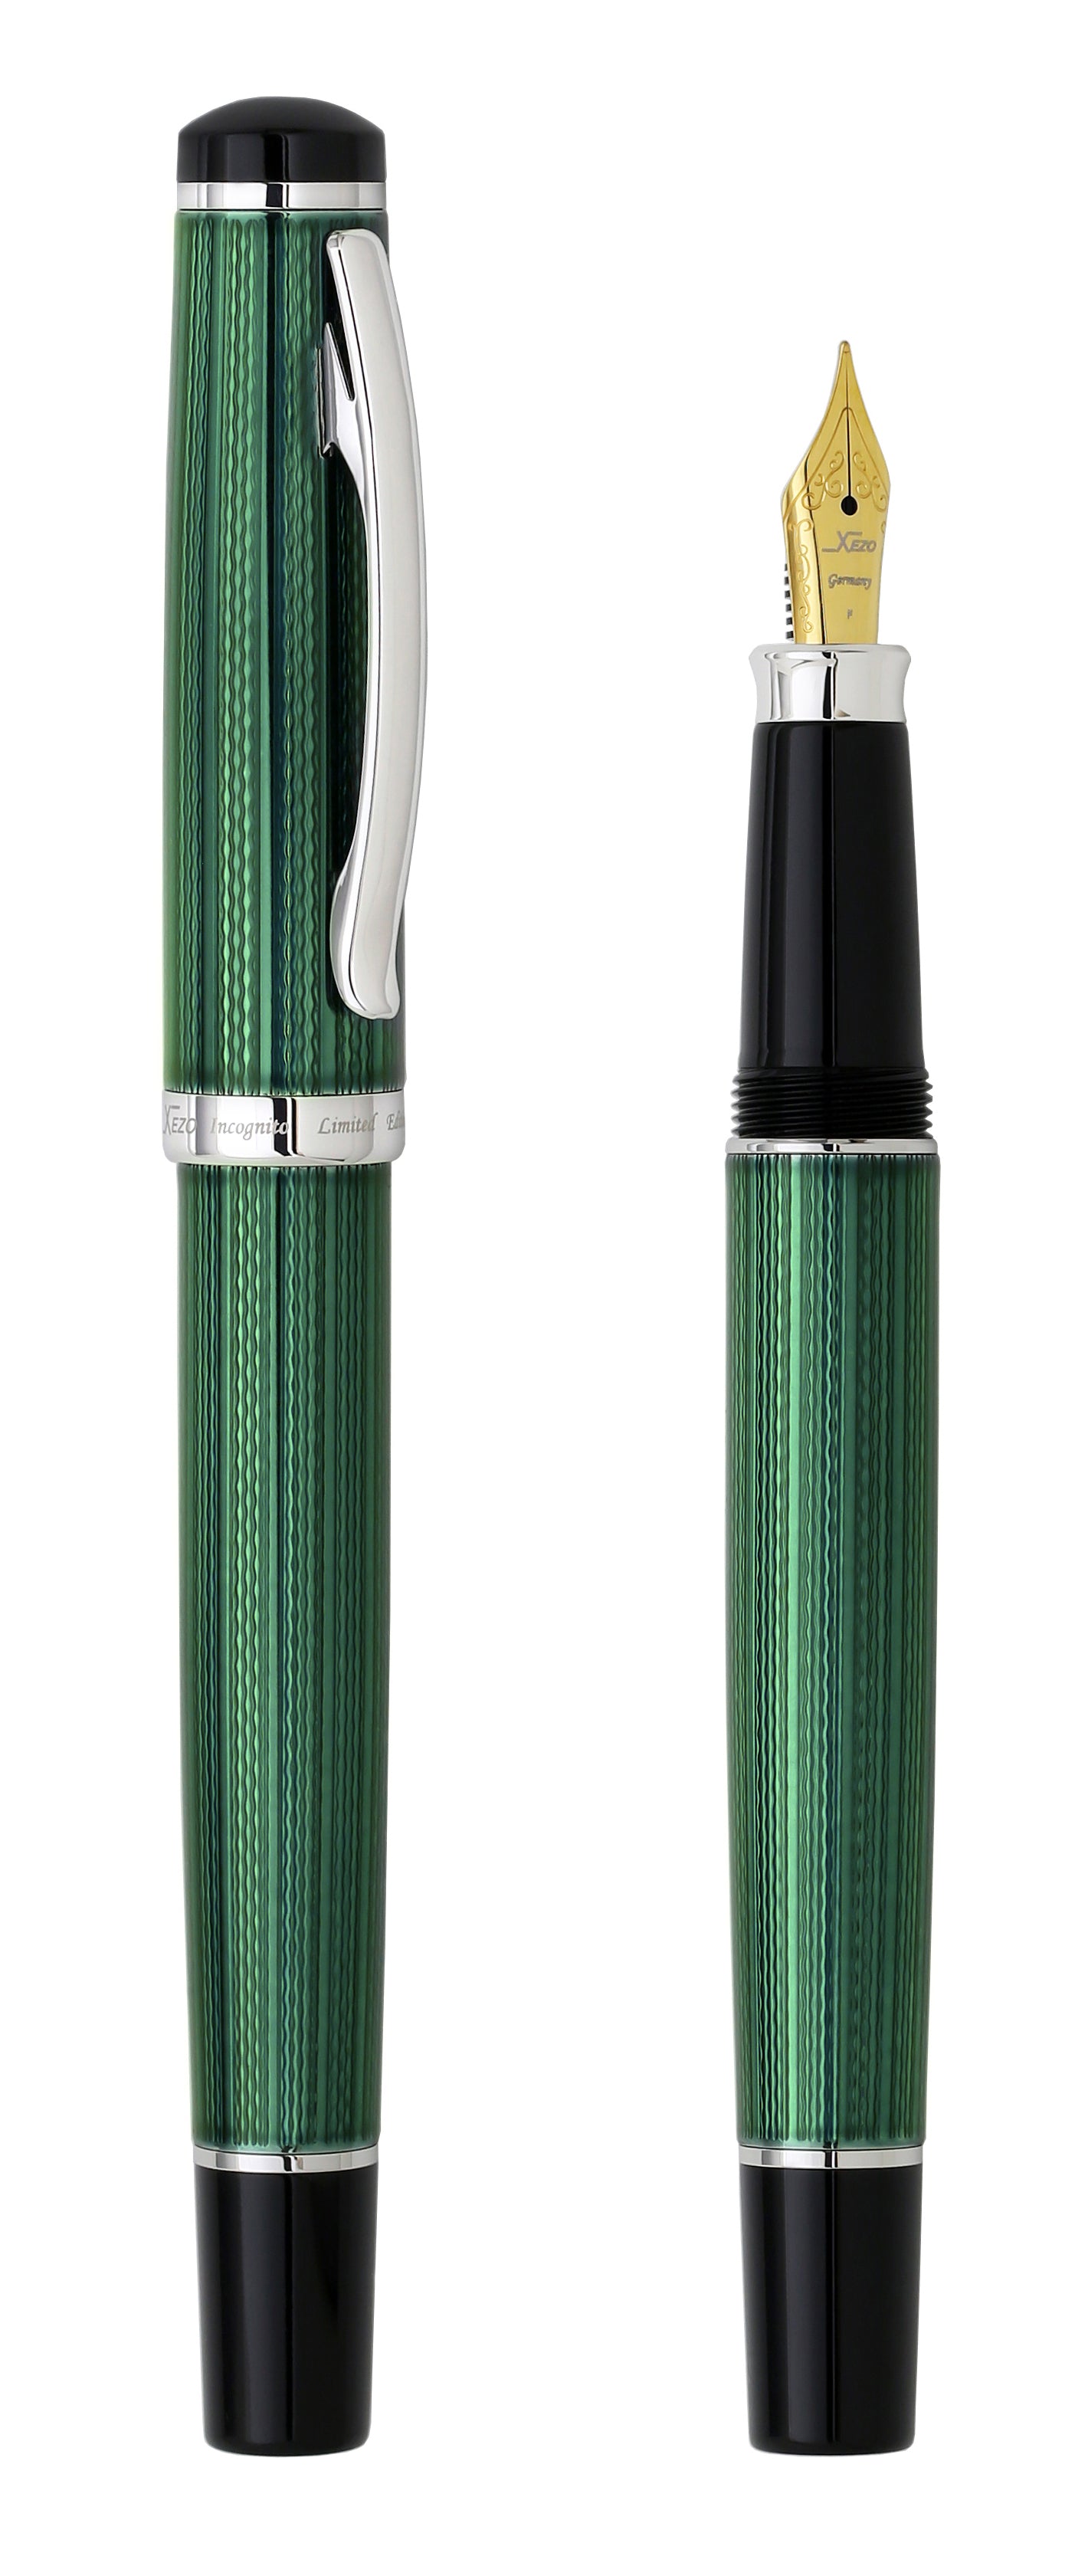 Xezo - Comparison between the angled view of the capped and uncapped Incognito Forest F fountain pens